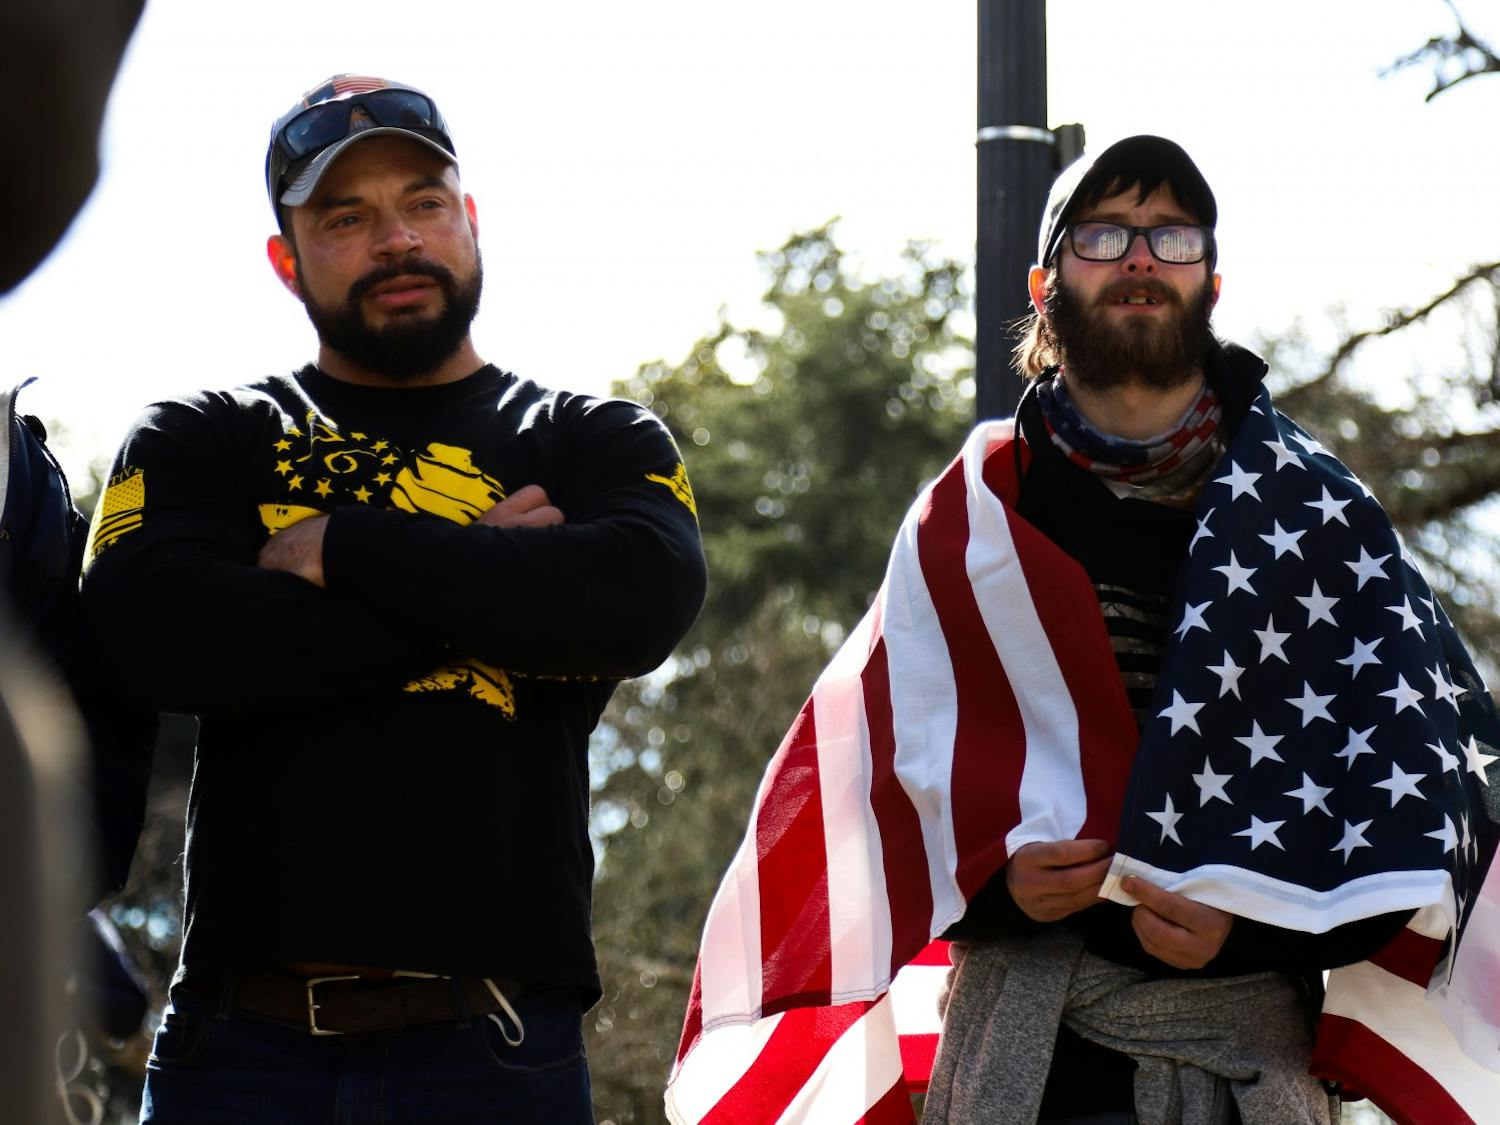 Two “Drive4America” caravan attendees stand side by side watching conversation between other protesters. One of the attendees wore an American flag around his shoulders.&nbsp;